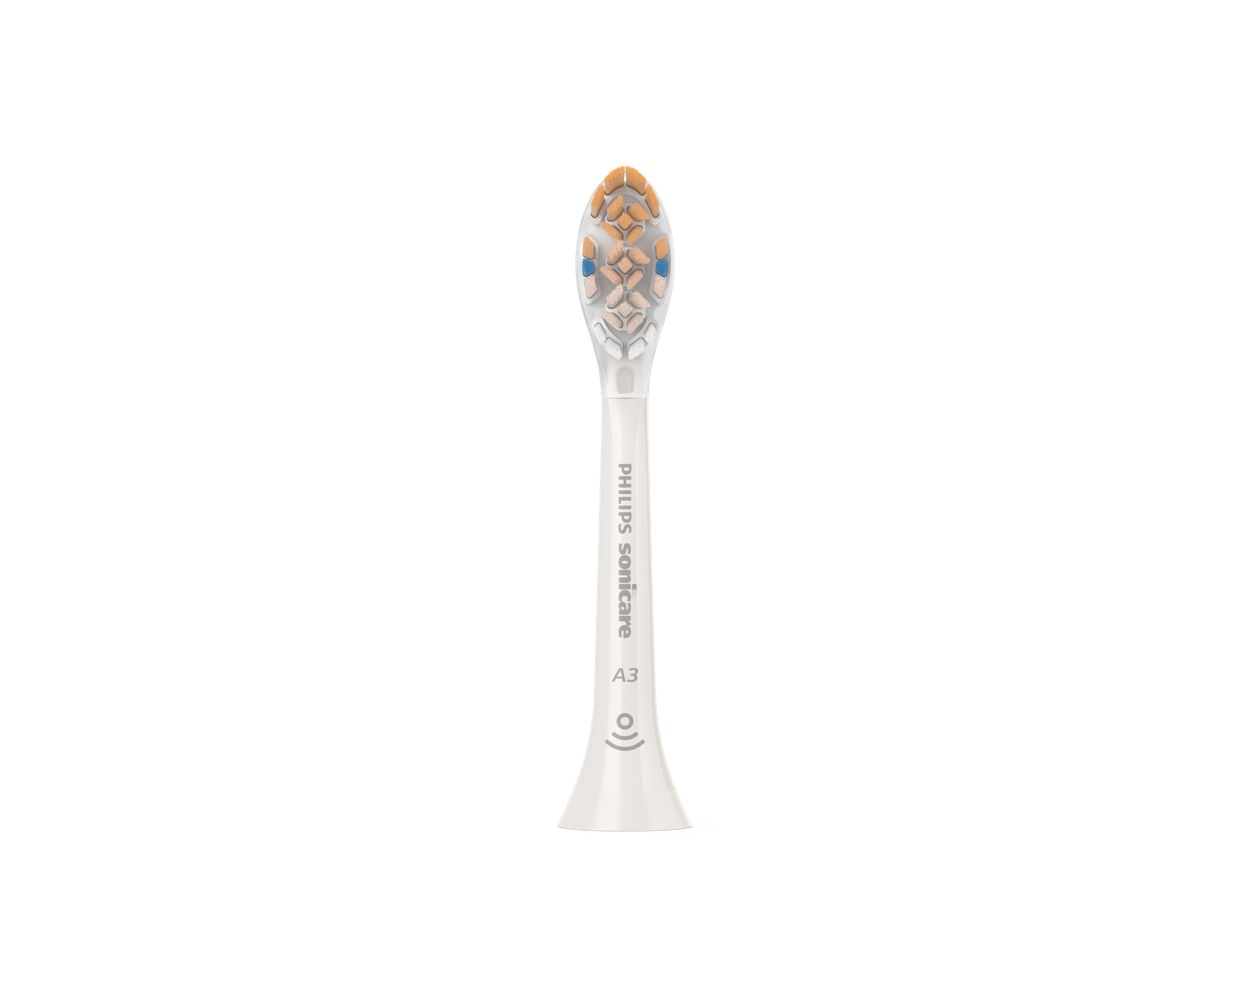 Buy Philips A3 Premium All-in-One Standard Sonic Toothbrush Heads